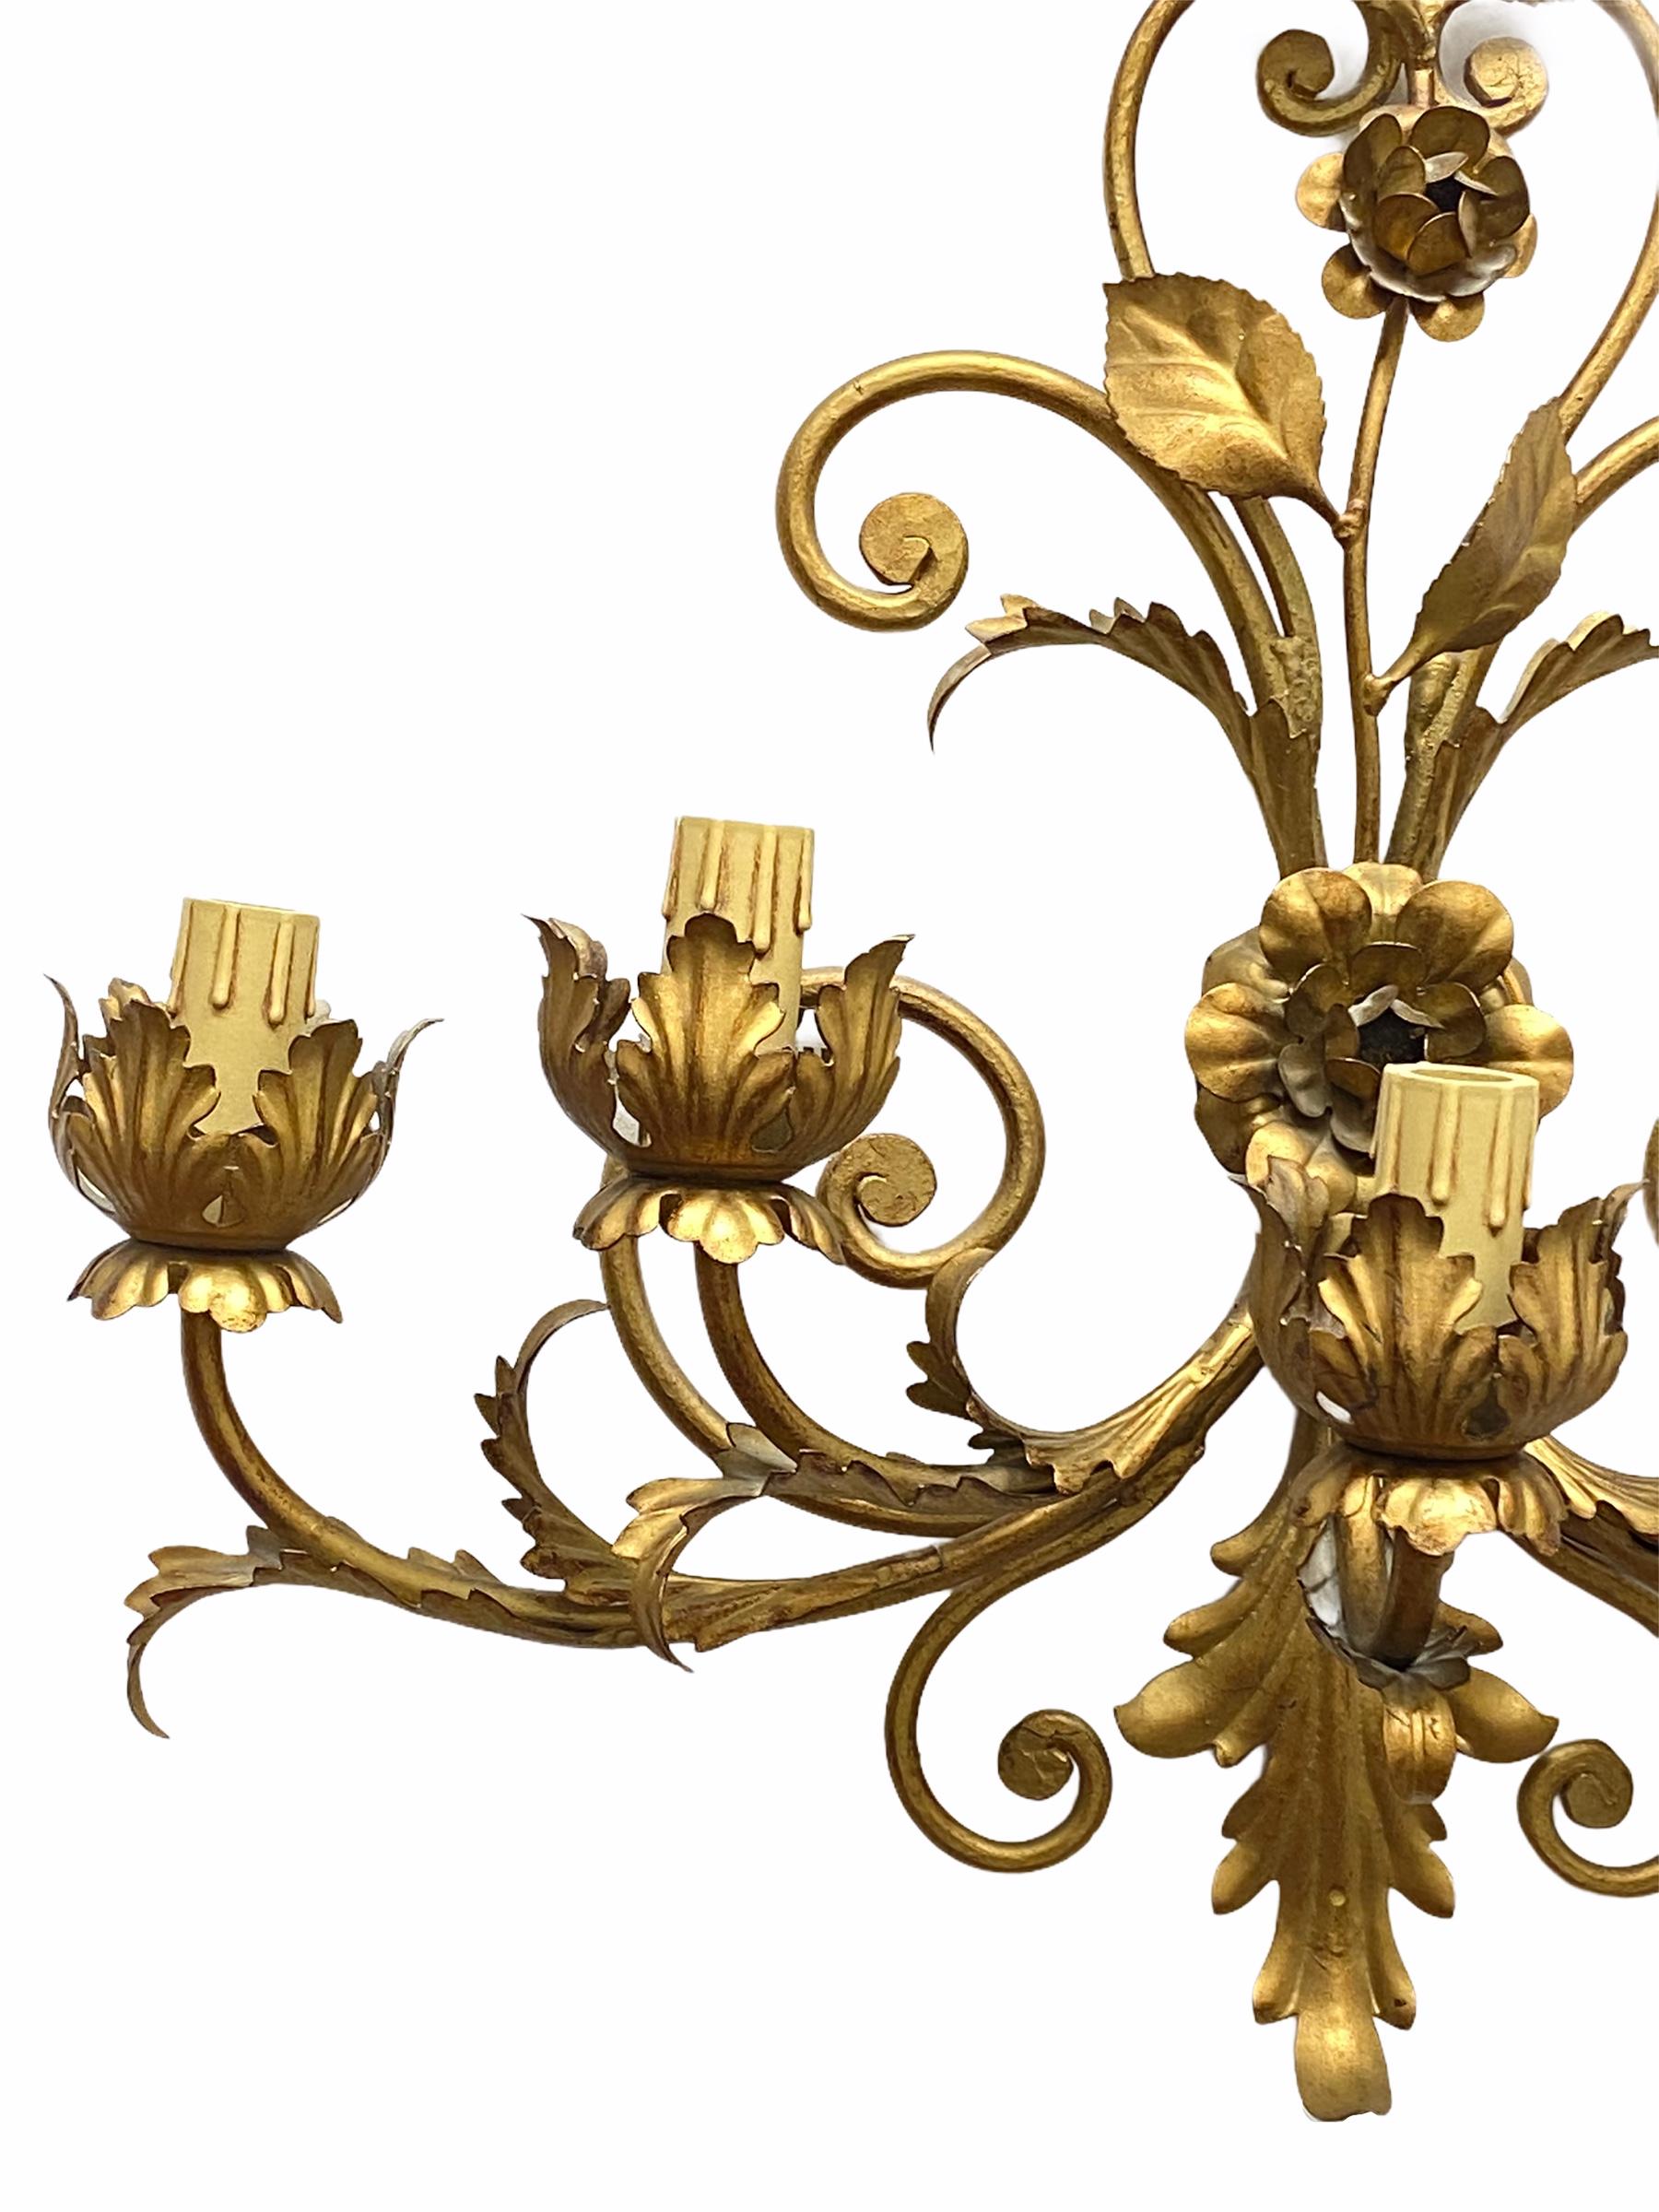 Add a touch of opulence to your home with this charming sconce. Perfect gilt metal leafs to enhance any chic or eclectic home. We'd love to see it hanging in an entryway as a charming welcome home. Built in the 1960s, probably in Italy, this sconce